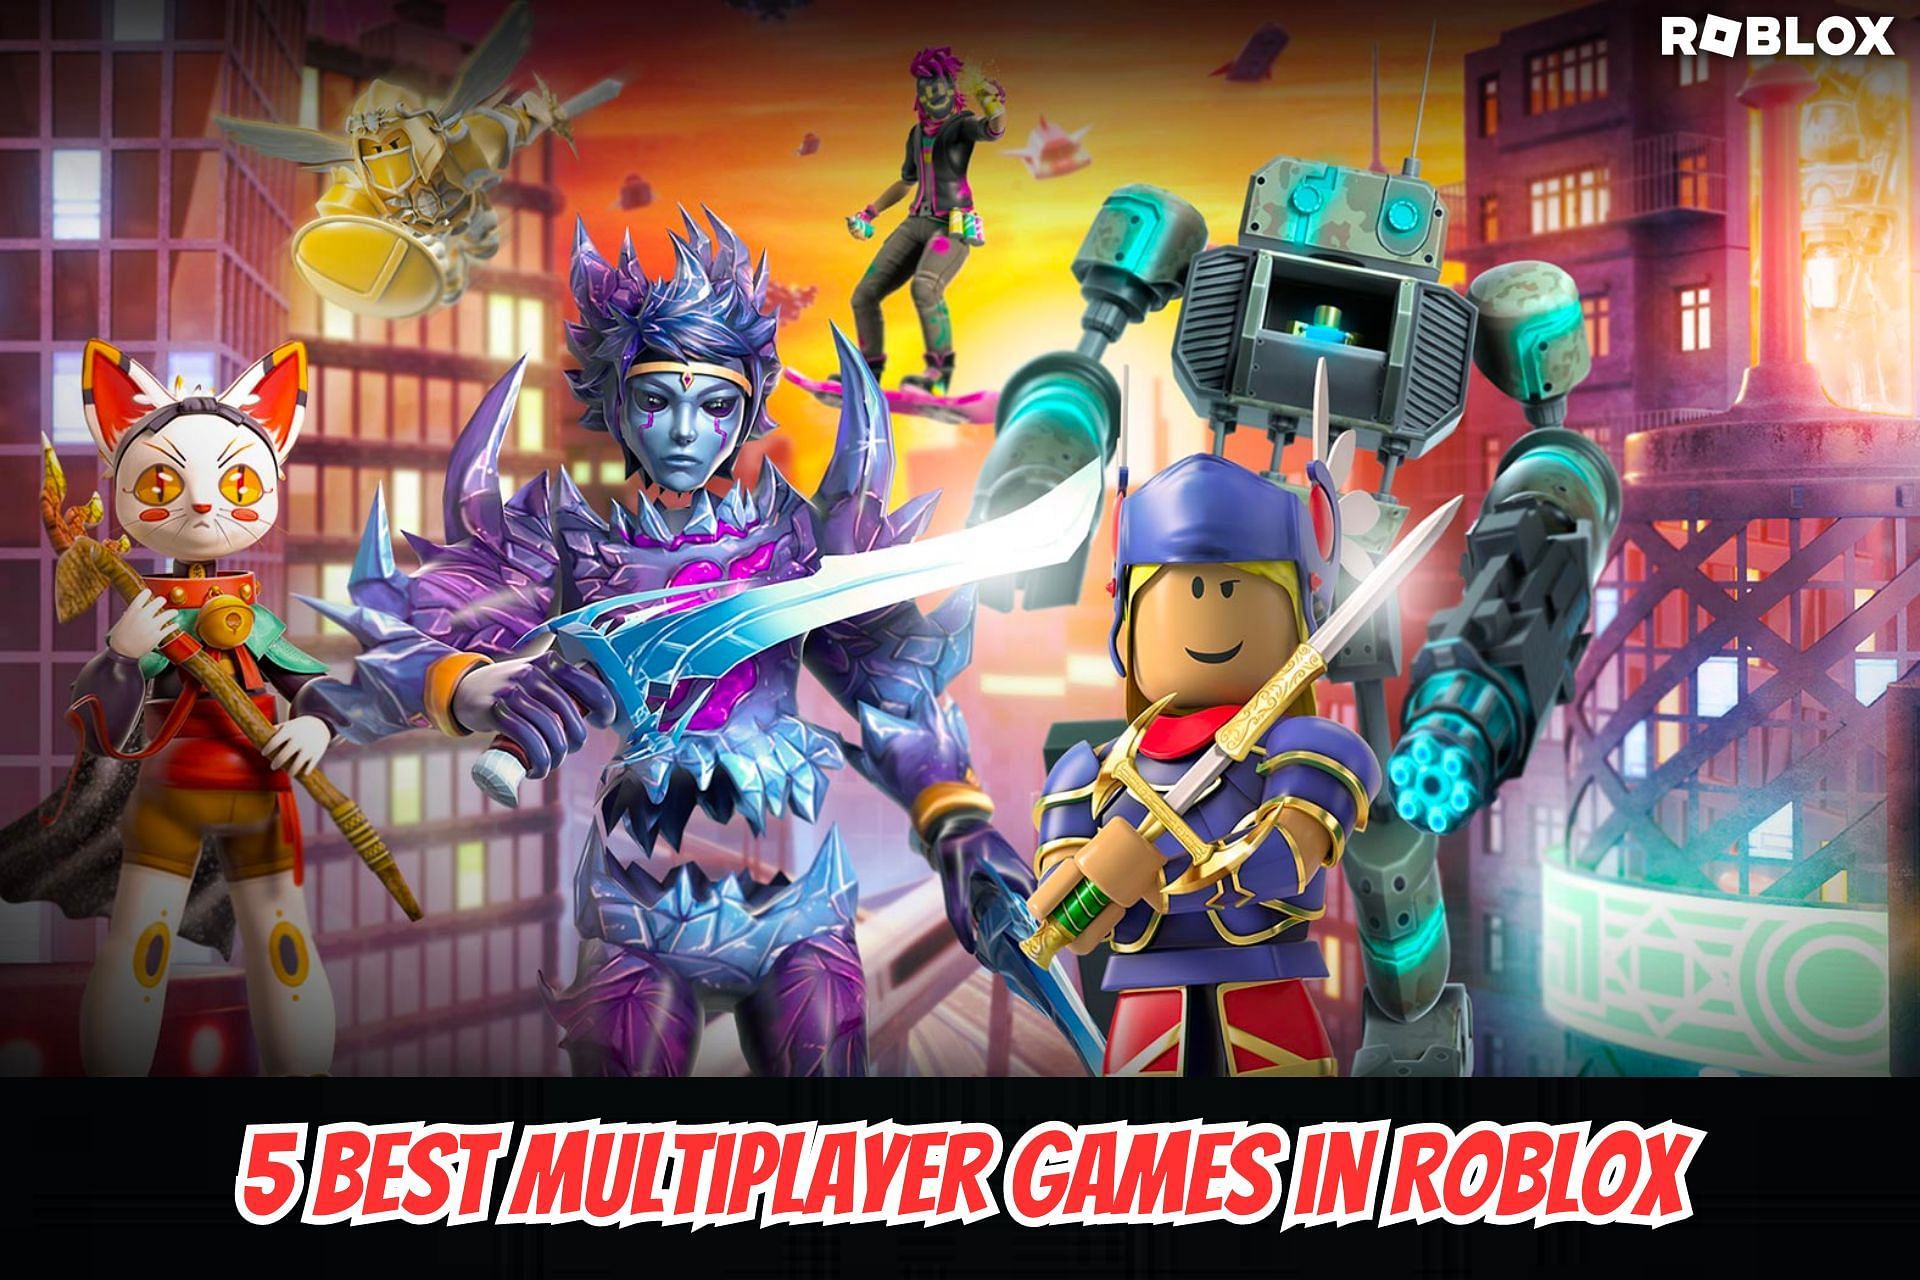 Top 5 Multiplayer Games on Roblox · opsafetynow